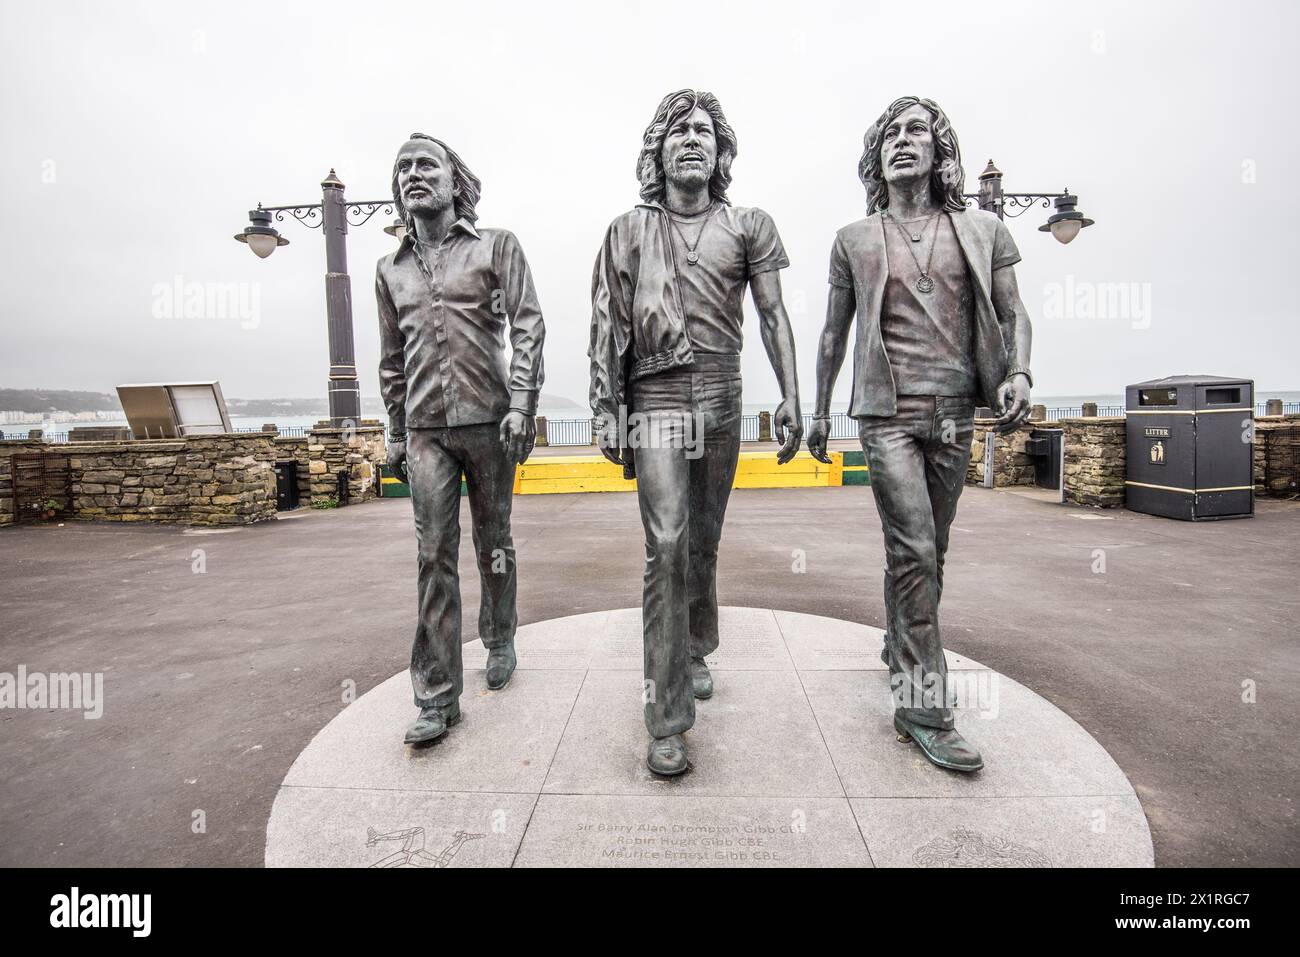 A statue of the Bee Gees by sculptor Andy Edwards was unveiled in Douglas Isle of Man in 2021.Located on Loch Promenade between Marine Gardens 1 & 2.. Stock Photo